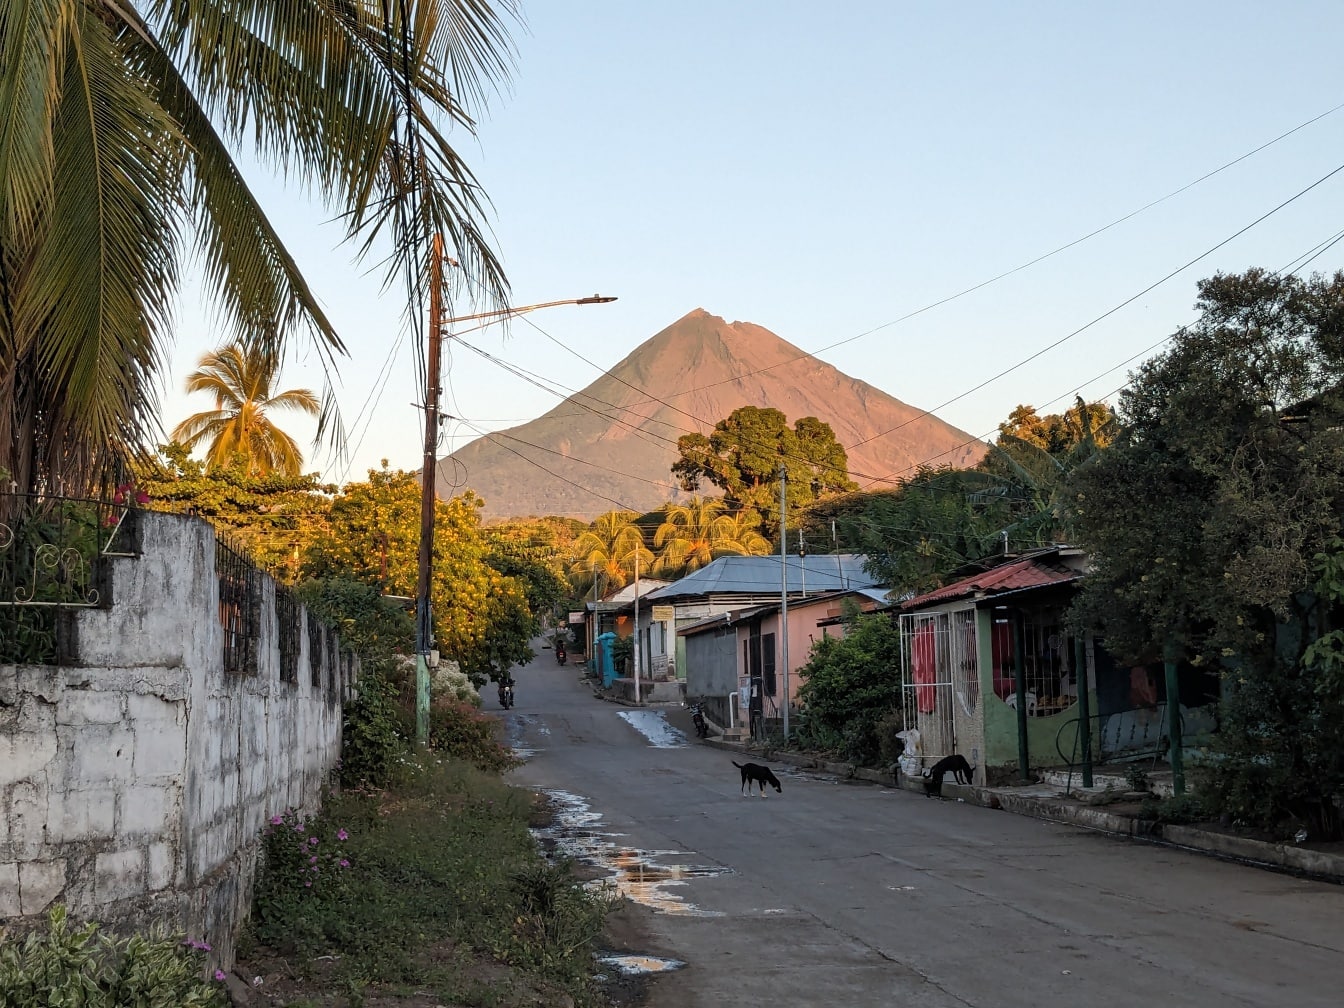 Street with houses in the Poor quarter with mountain in the background